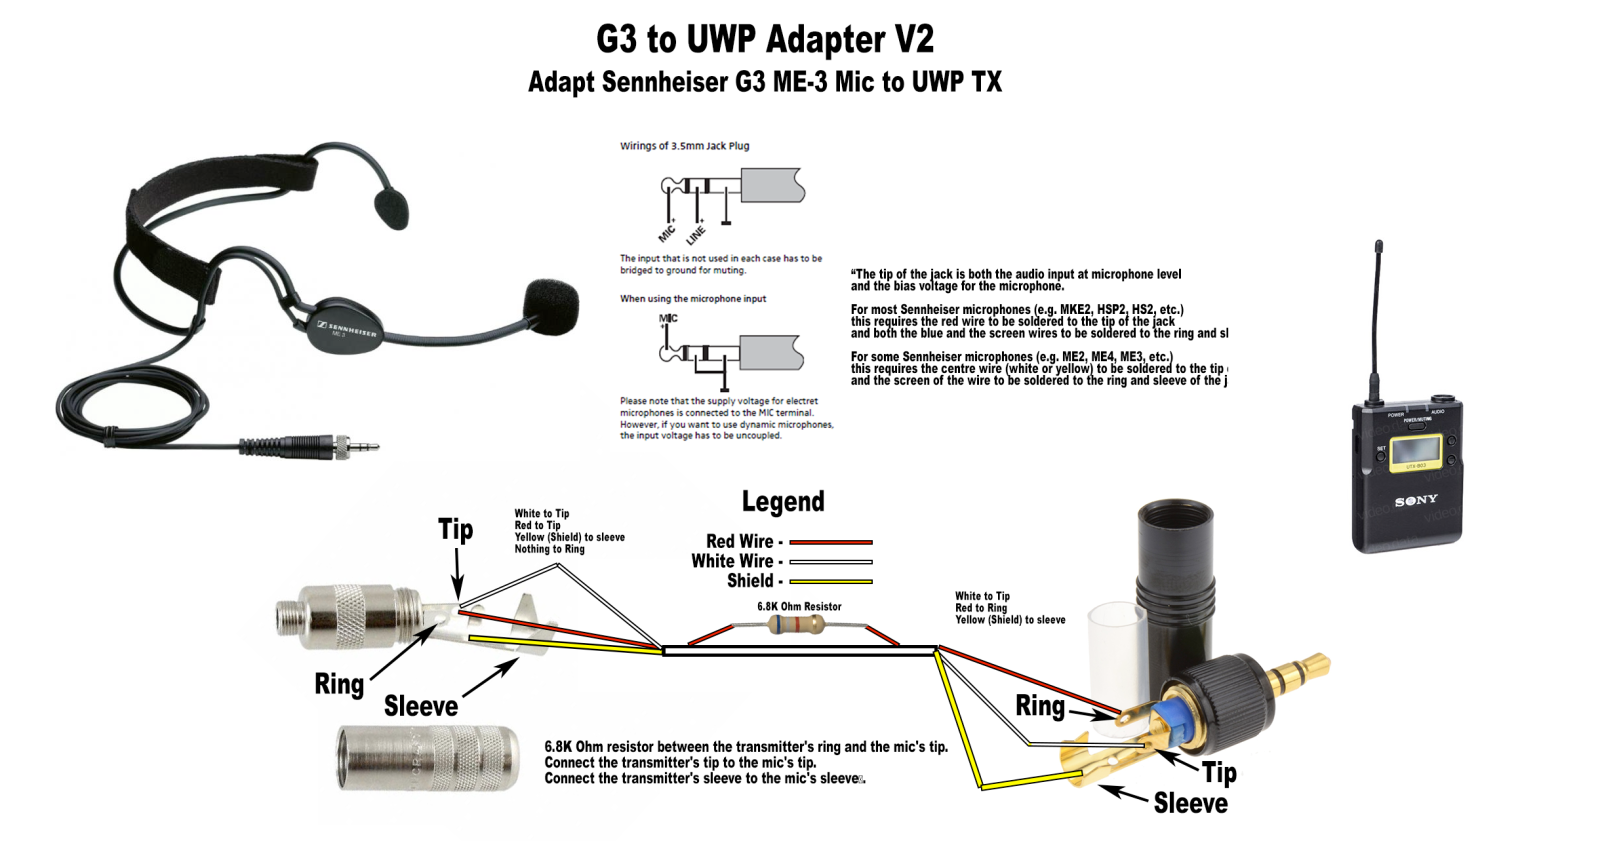 g3 to uwp adapter diagram. importantly, ring from the sony side is connected across a 6.8kohm resister to the tip on the ew side, the sony's tip goes straight to the ew tip, nothing on the ew ring, shield to shield.